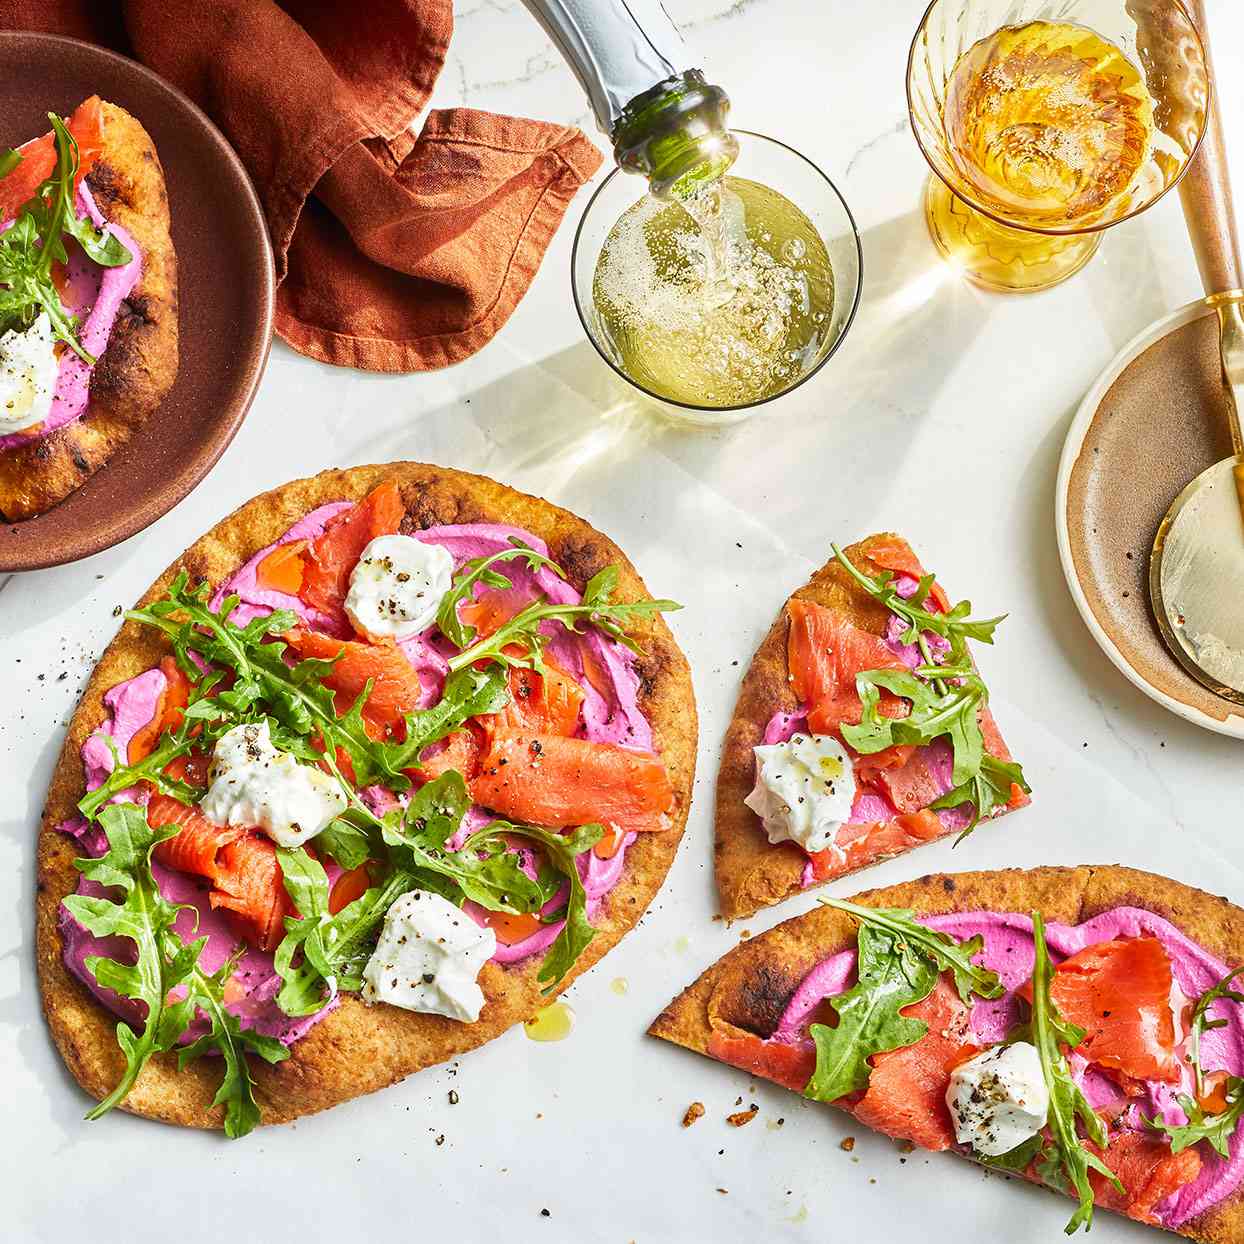 Smoked Salmon Flatbread with Whipped Beet Labneh